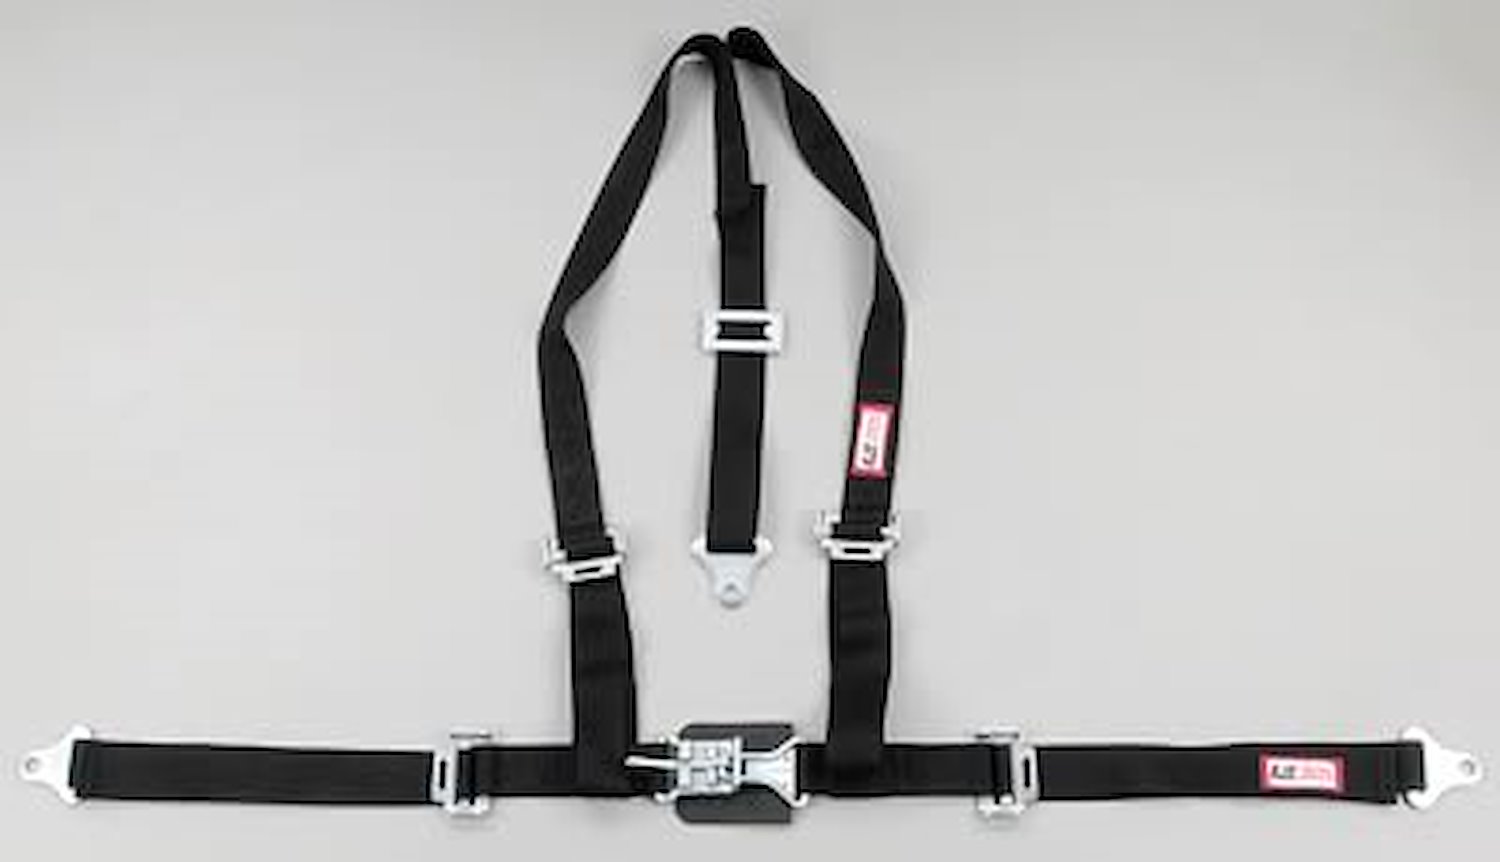 NON-SFI L&L HARNESS 3 PULL DOWN Lap Belt BOLT SEWN IN 2 S.H. Individual FLOOR Mount w/STERNUM STRAP WRAP/BOLT HOT PINK